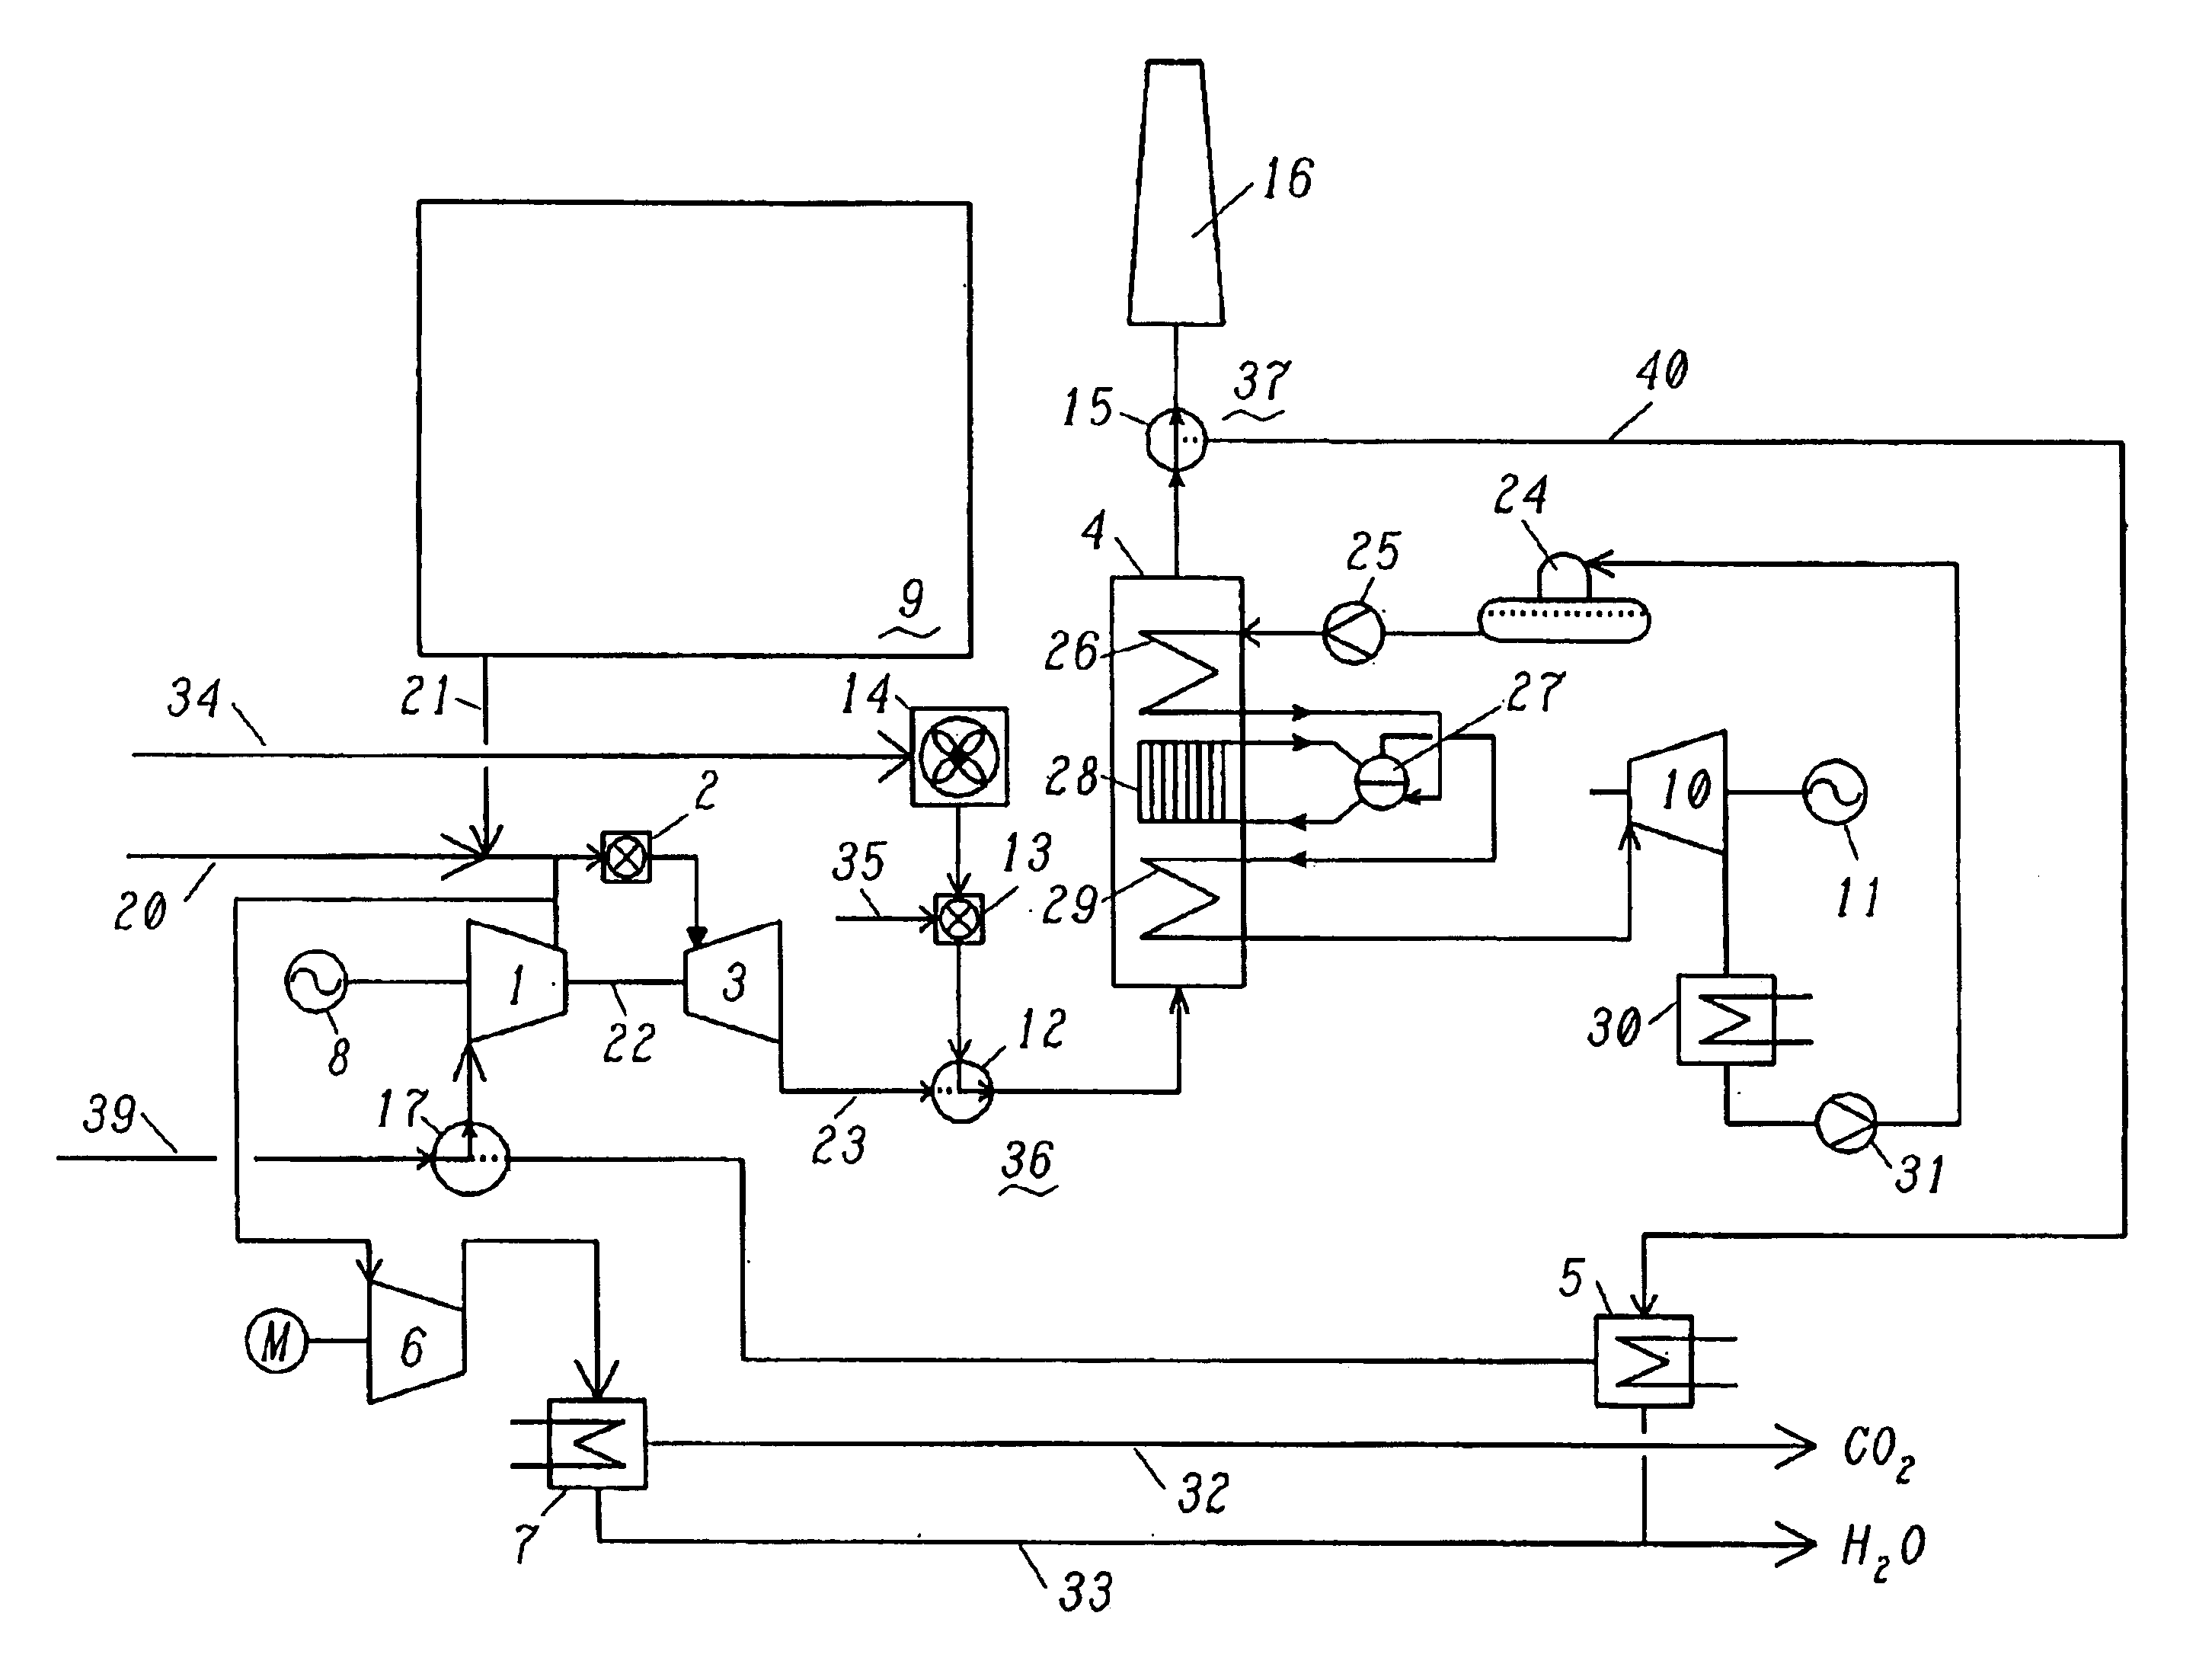 Methods and apparatus for starting up emission-free gas-turbine power stations